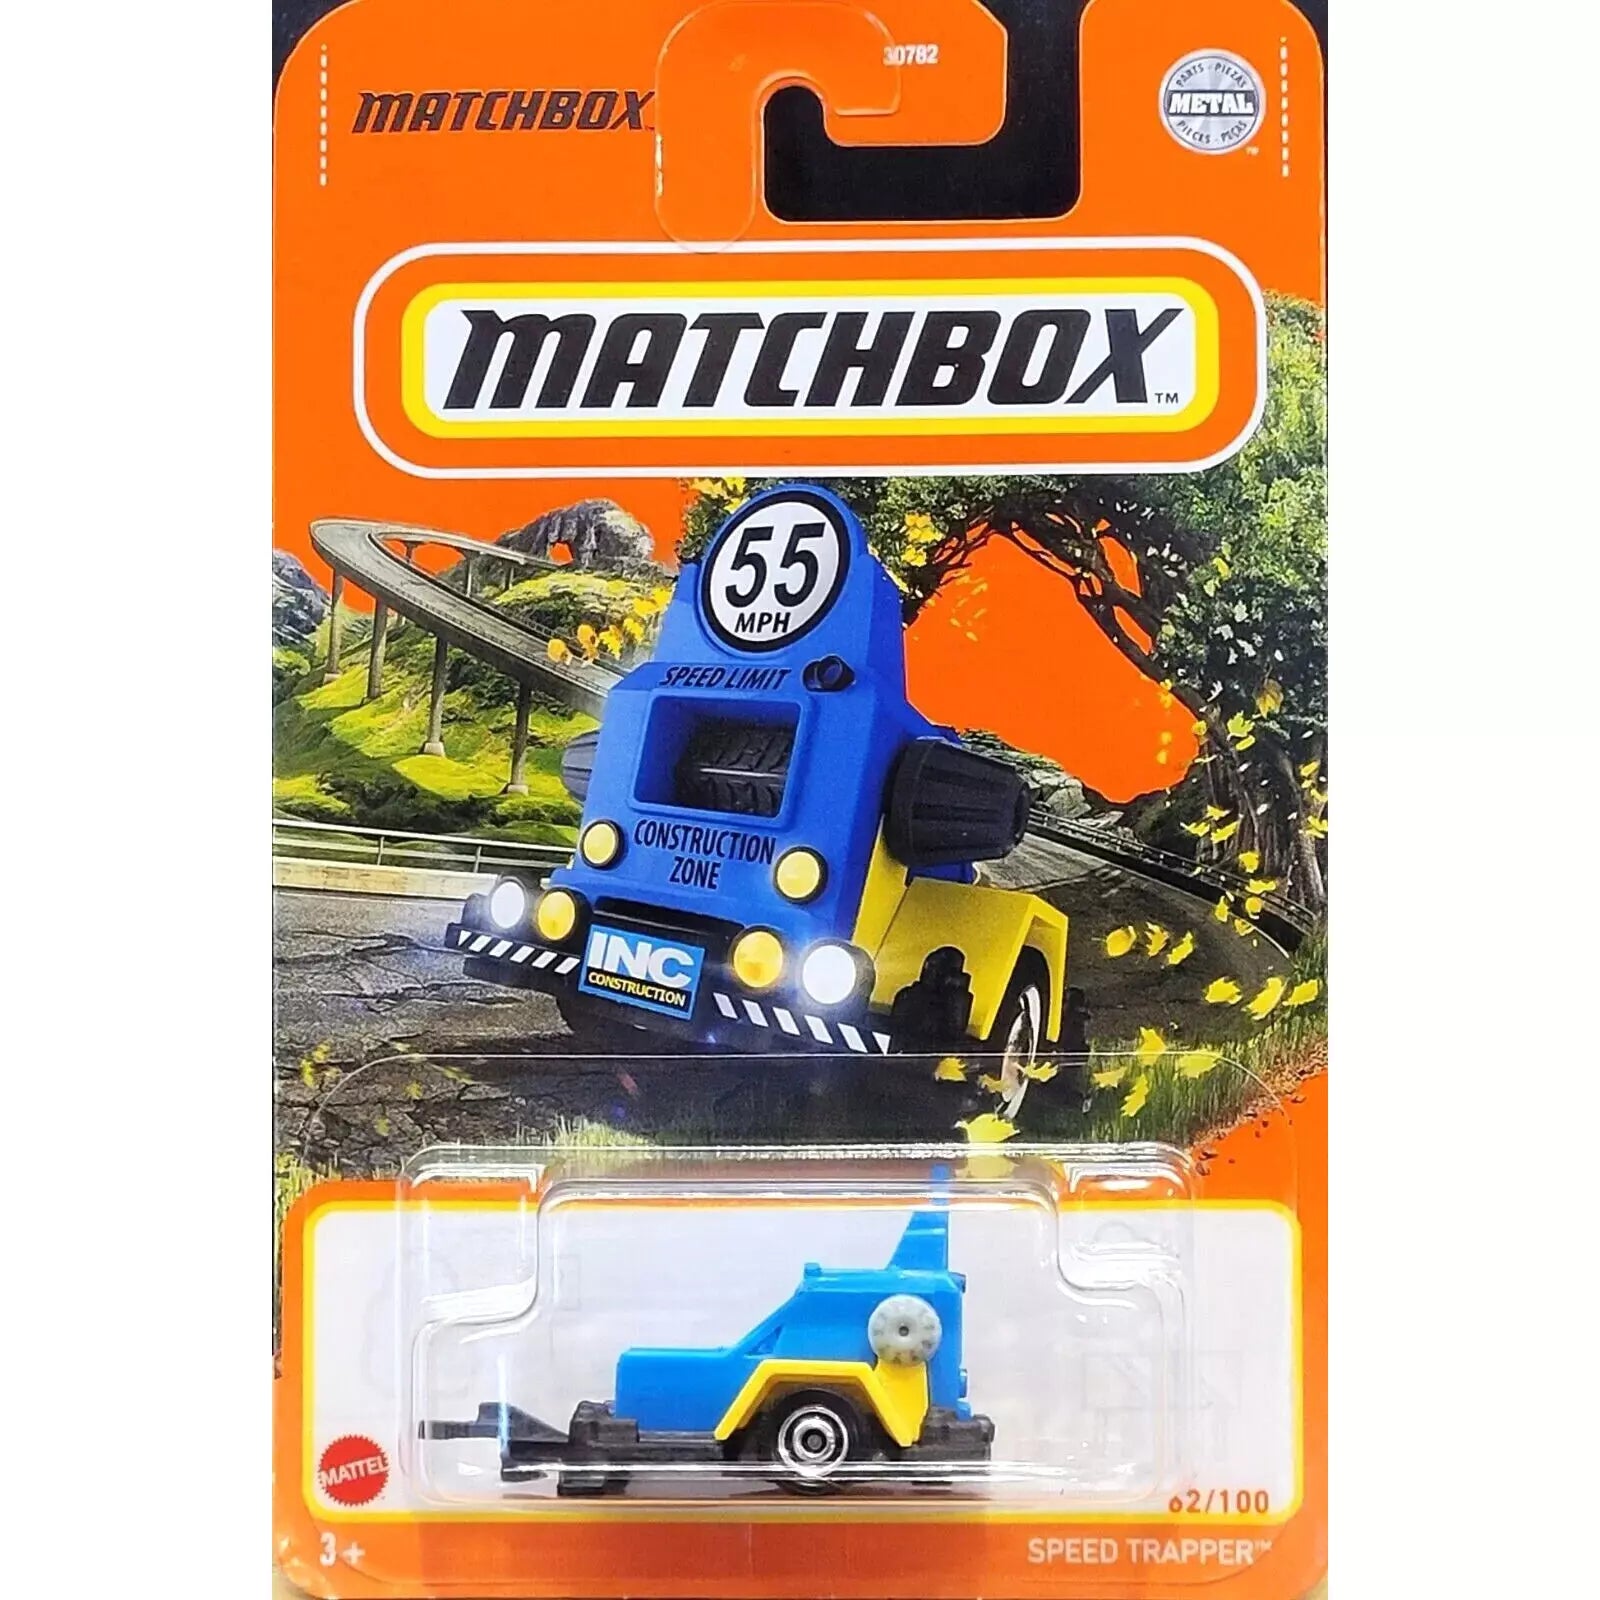 MatchBox Die Cast 1:64 Scale Vehicle - Speed Trapper - BumbleToys - 2-4 Years, 5-7 Years, Boys, Collectible Vehicles, MatchBox